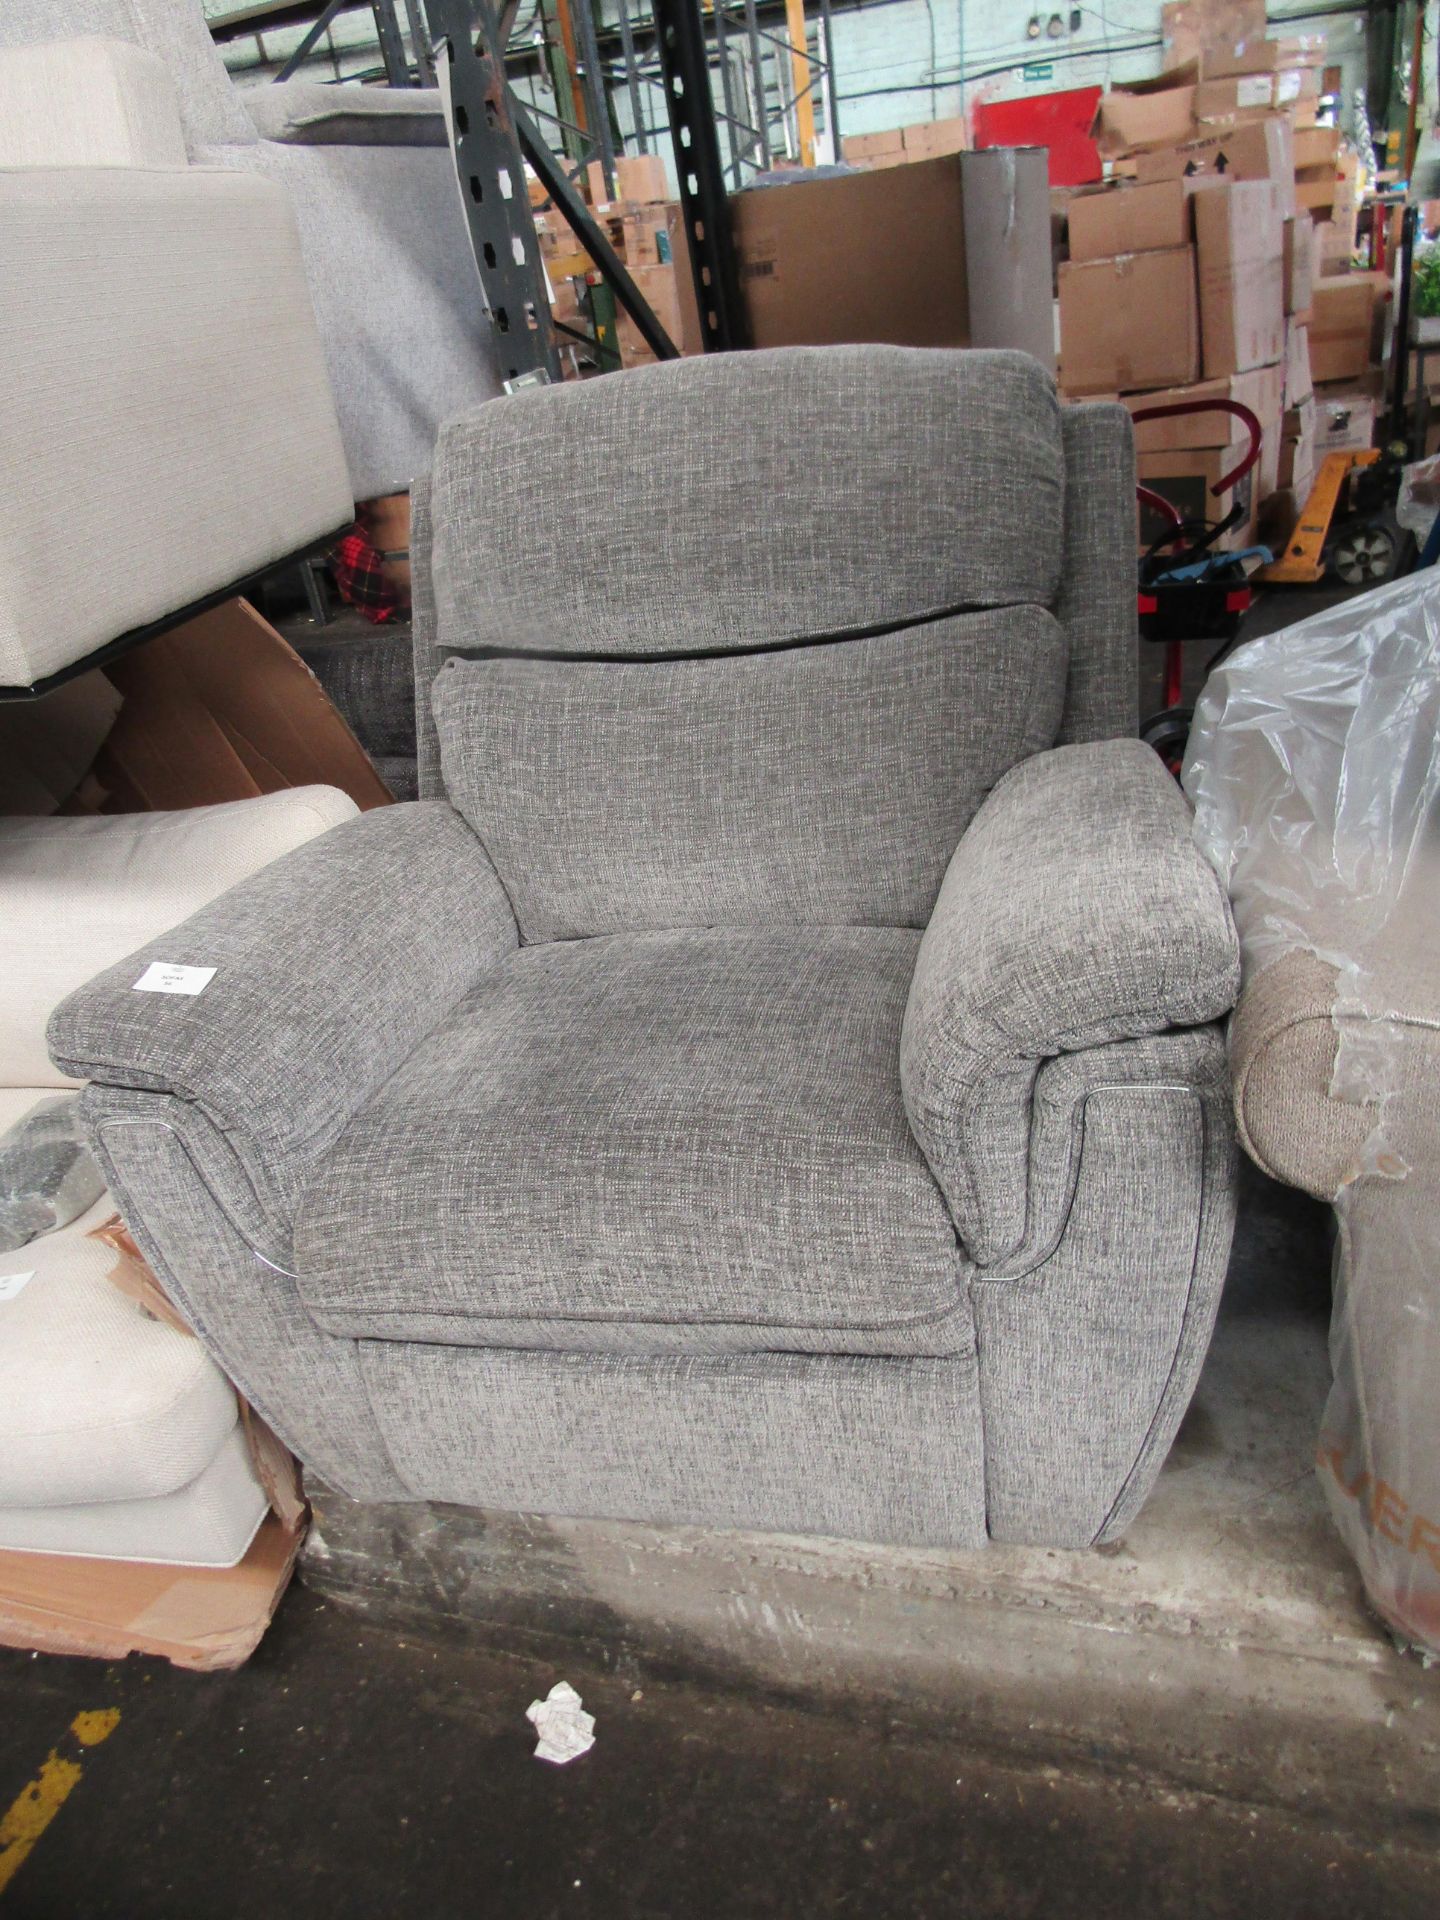 Ashton Swivel Glider Chair Vitolini Charcoal All Over Swivel Base/Trim RRP 1499About the Product(s) - Image 2 of 2